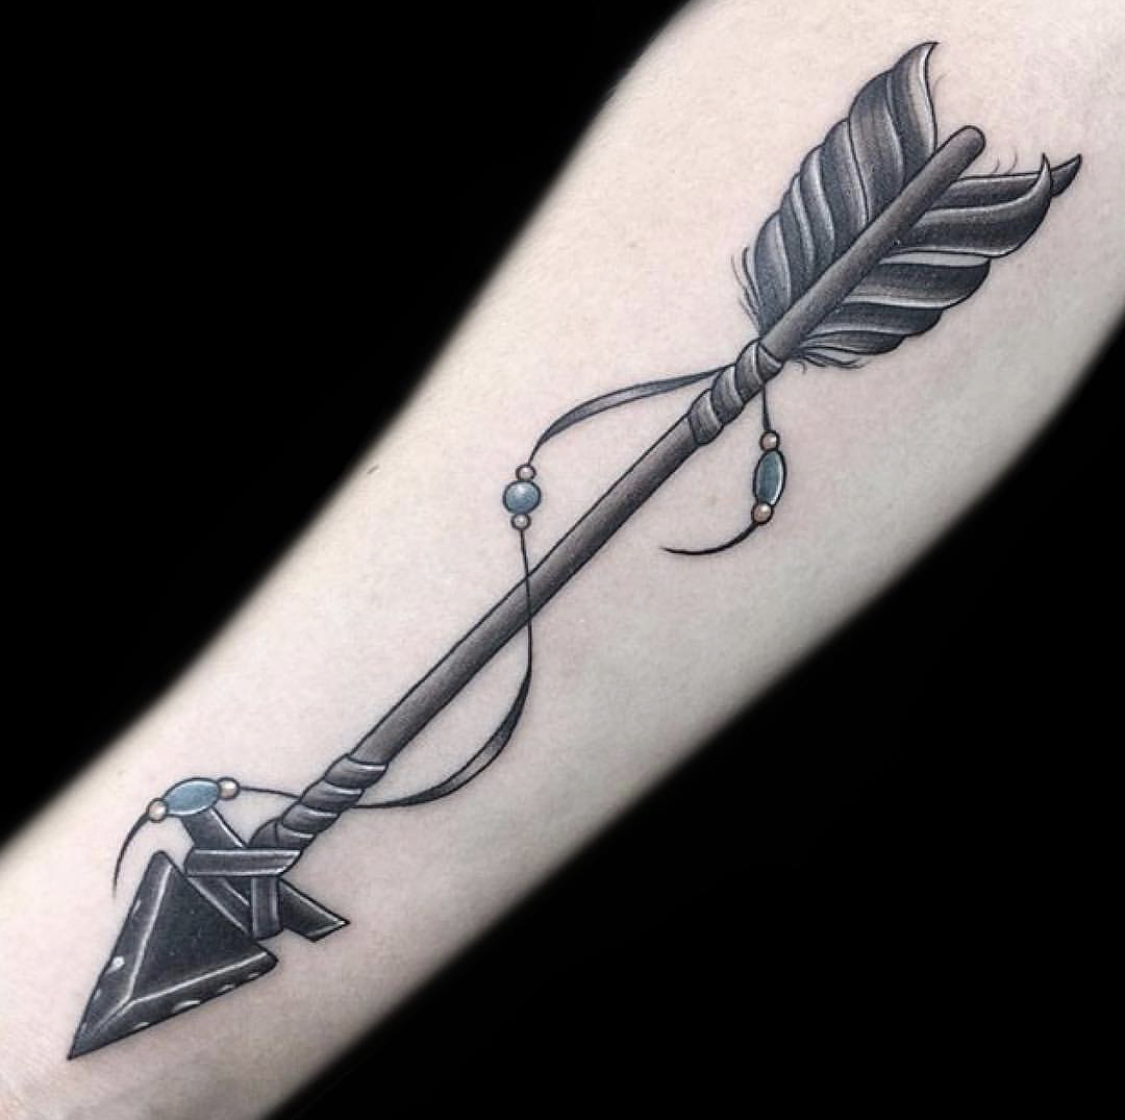 101 Best Bow And Arrow Tattoo Ideas You'll Have To See To Believe!